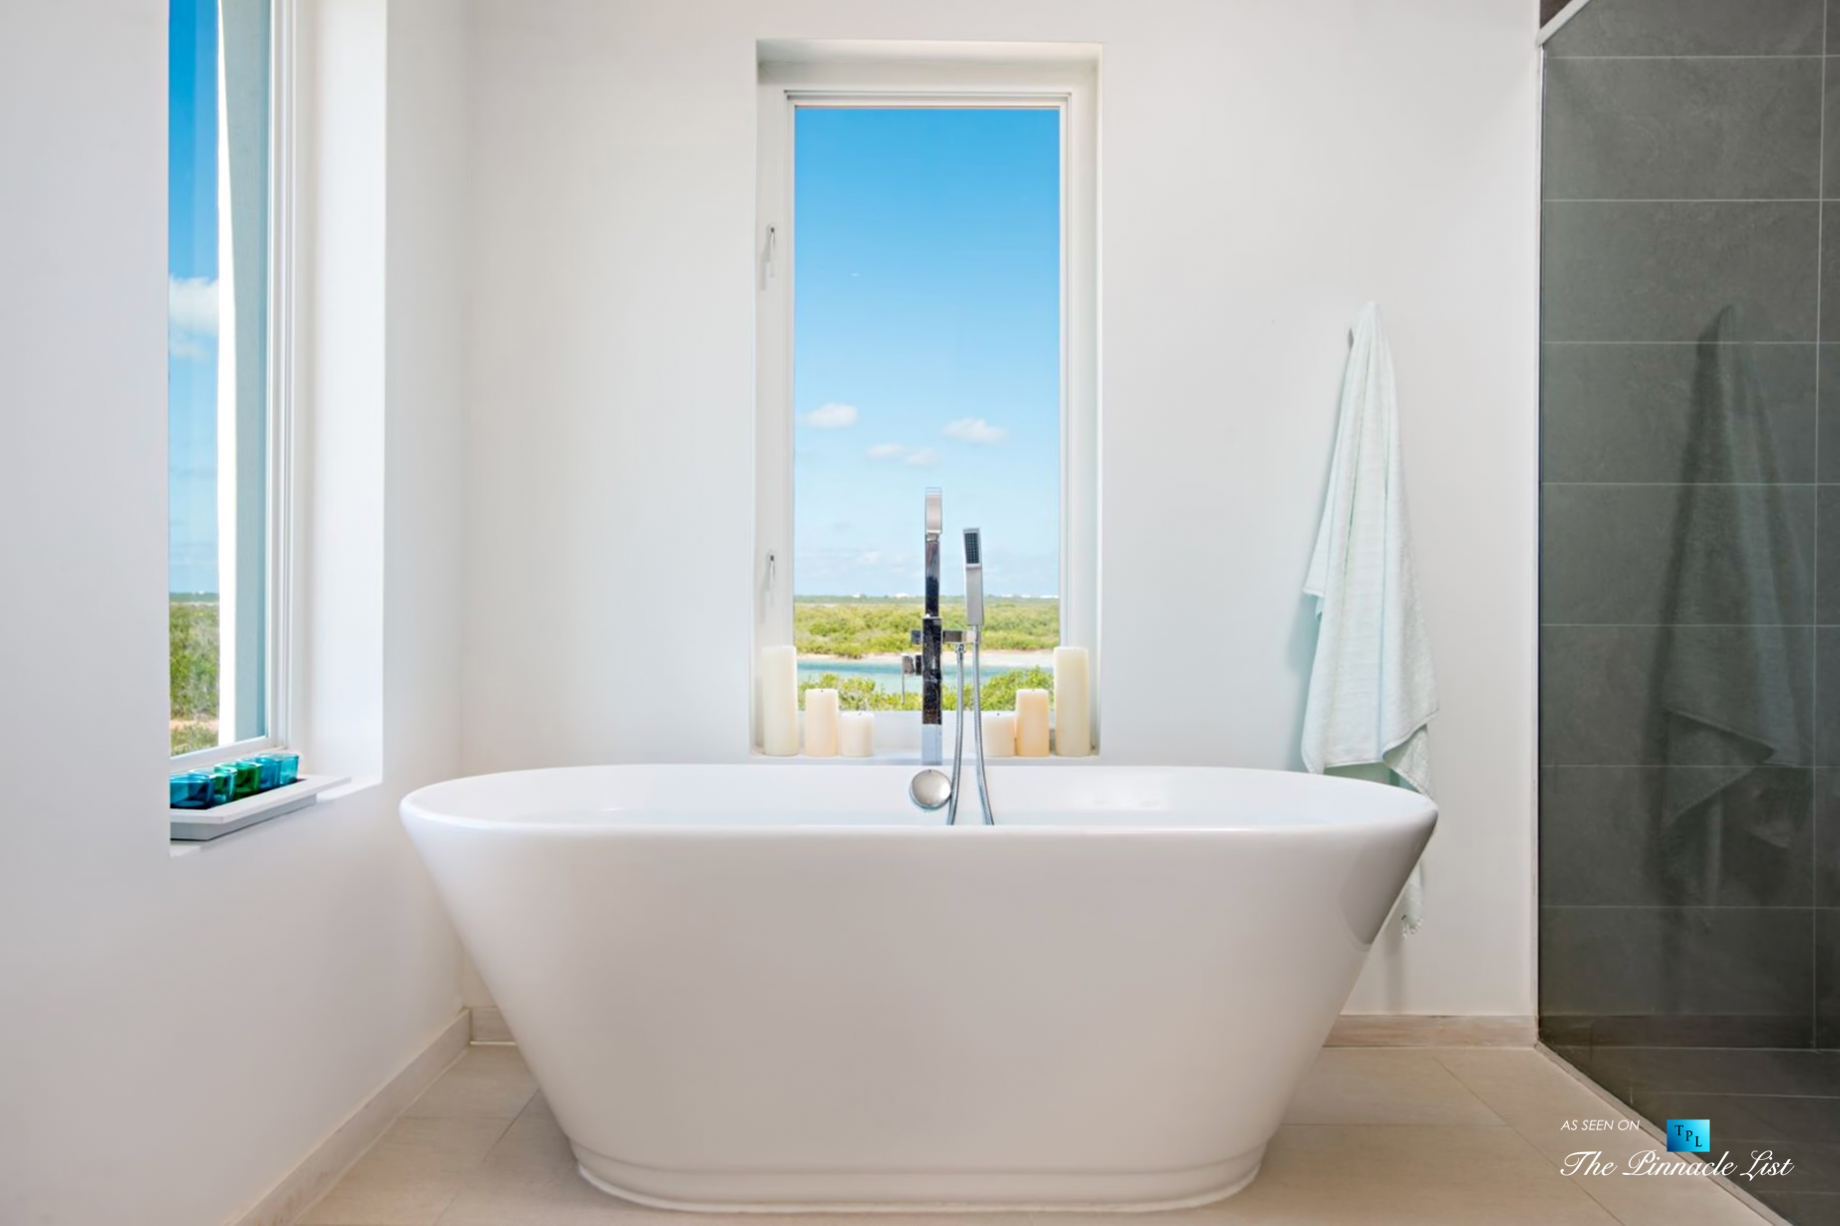 Tip of the Tail Villa – Providenciales, Turks and Caicos Islands – Caribbean House Bathroom Freestanding Tub – Luxury Real Estate – South Shore Peninsula Home